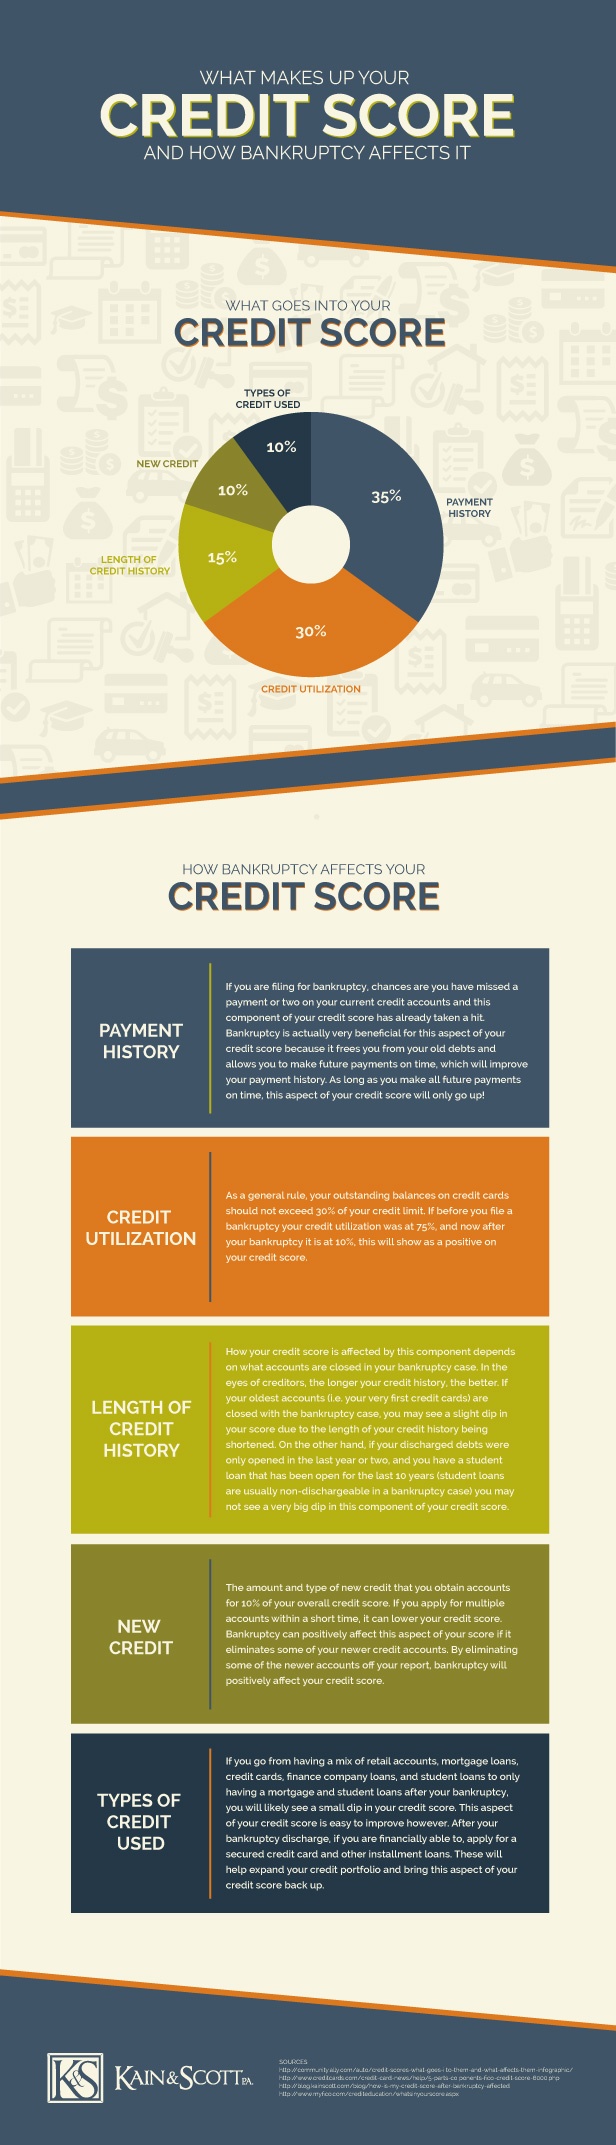 what makes up your credit score and how bankruptcy affects it infographic